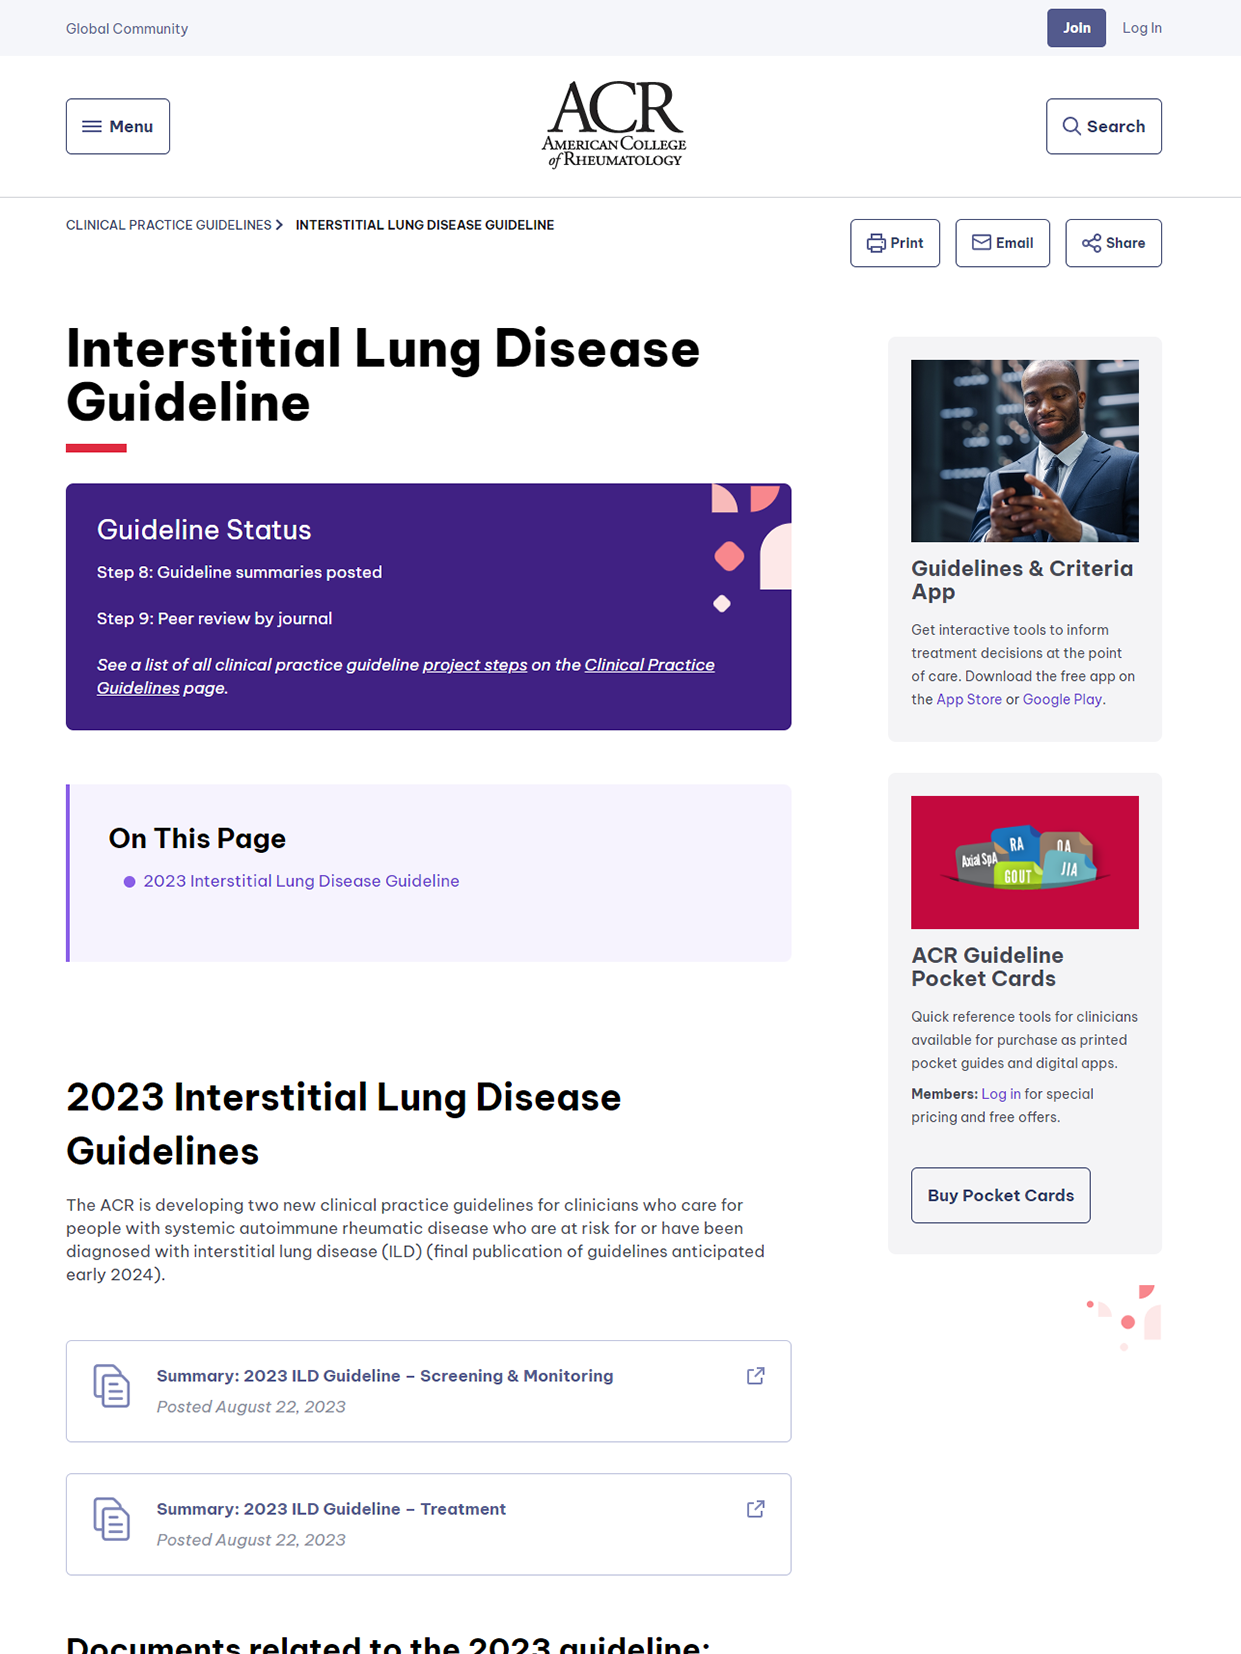 2023 American College of Rheumatology (ACR) Guideline for the Screening and Monitoring of Interstitial Lung Disease in People with Systemic Autoimmune Rheumatic Disease (ACR 2023)